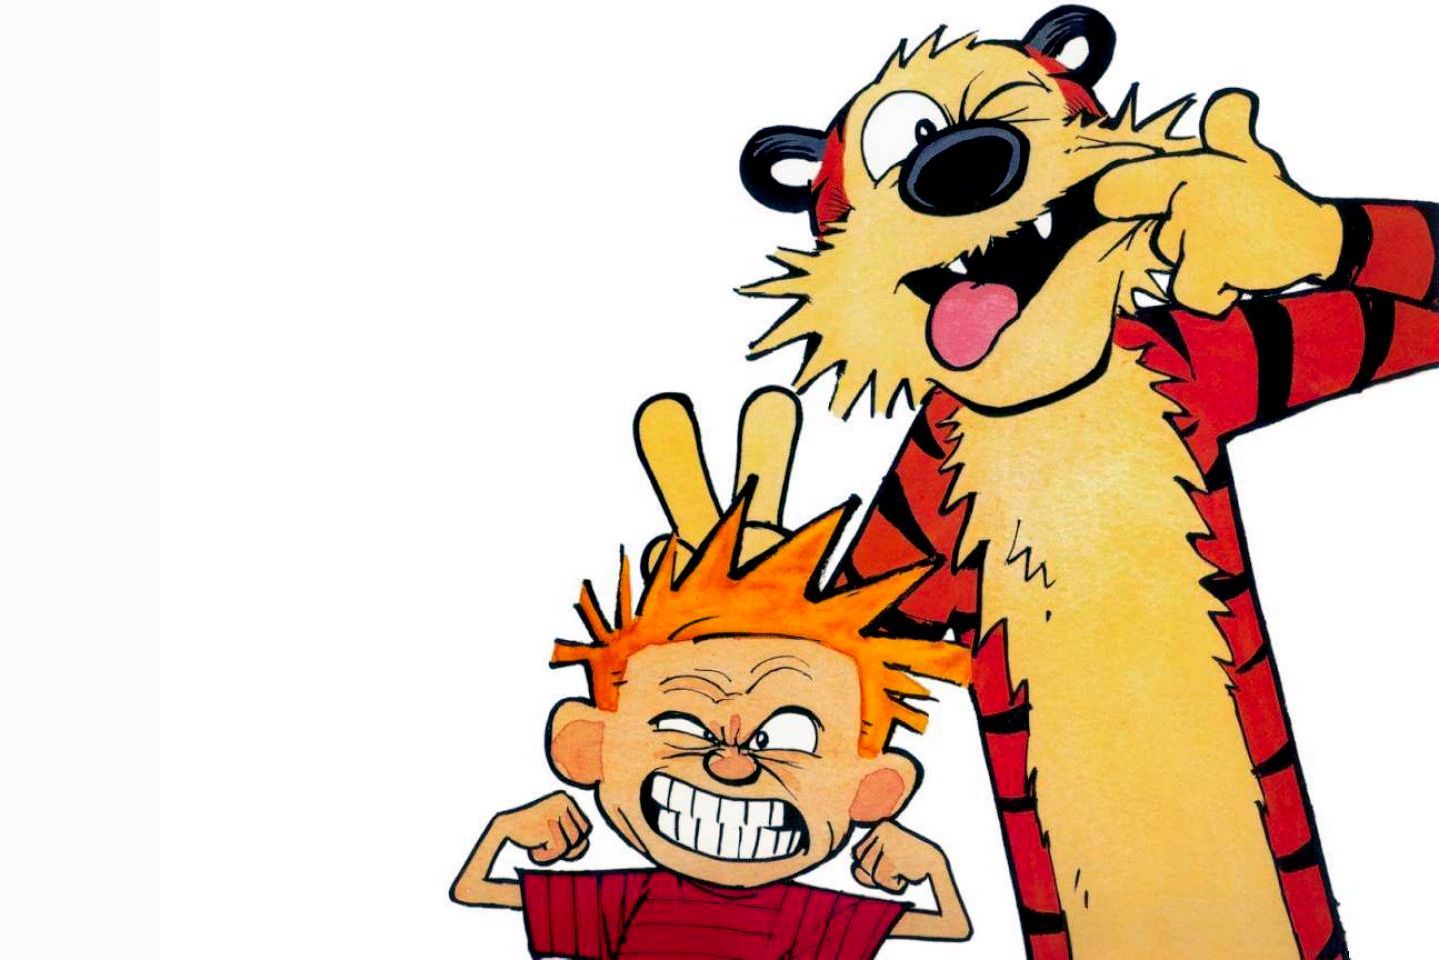 Calvin and hobbes wallpaper - High Quality and other